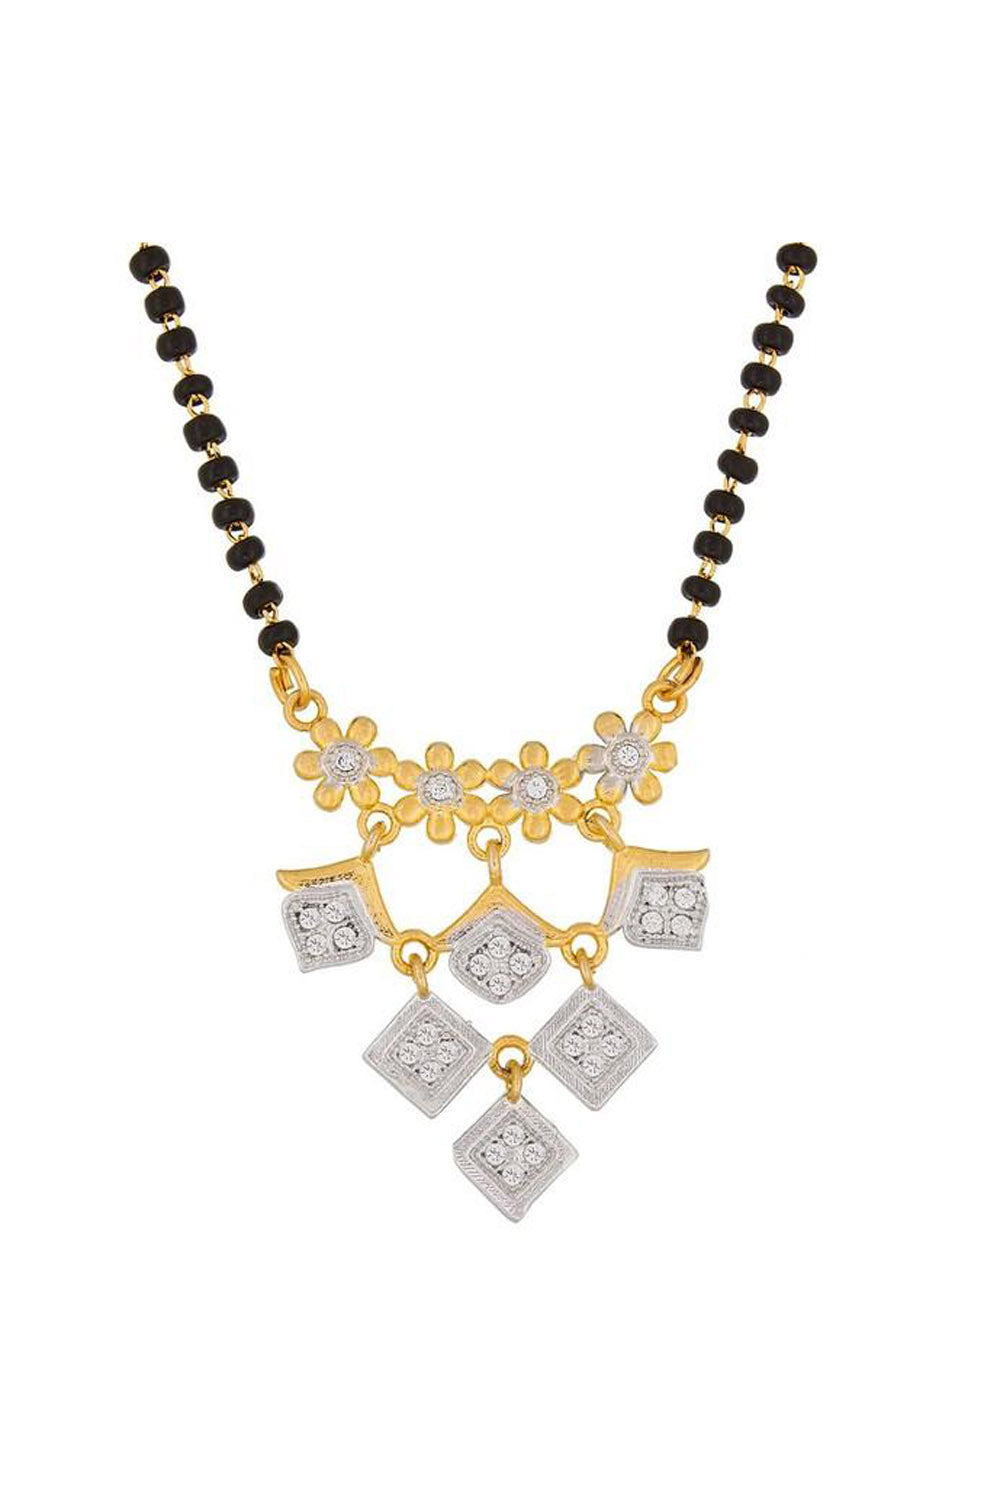 Shop Alloy Mangalsutra  For Women's  in White and Gold At KarmaPlace